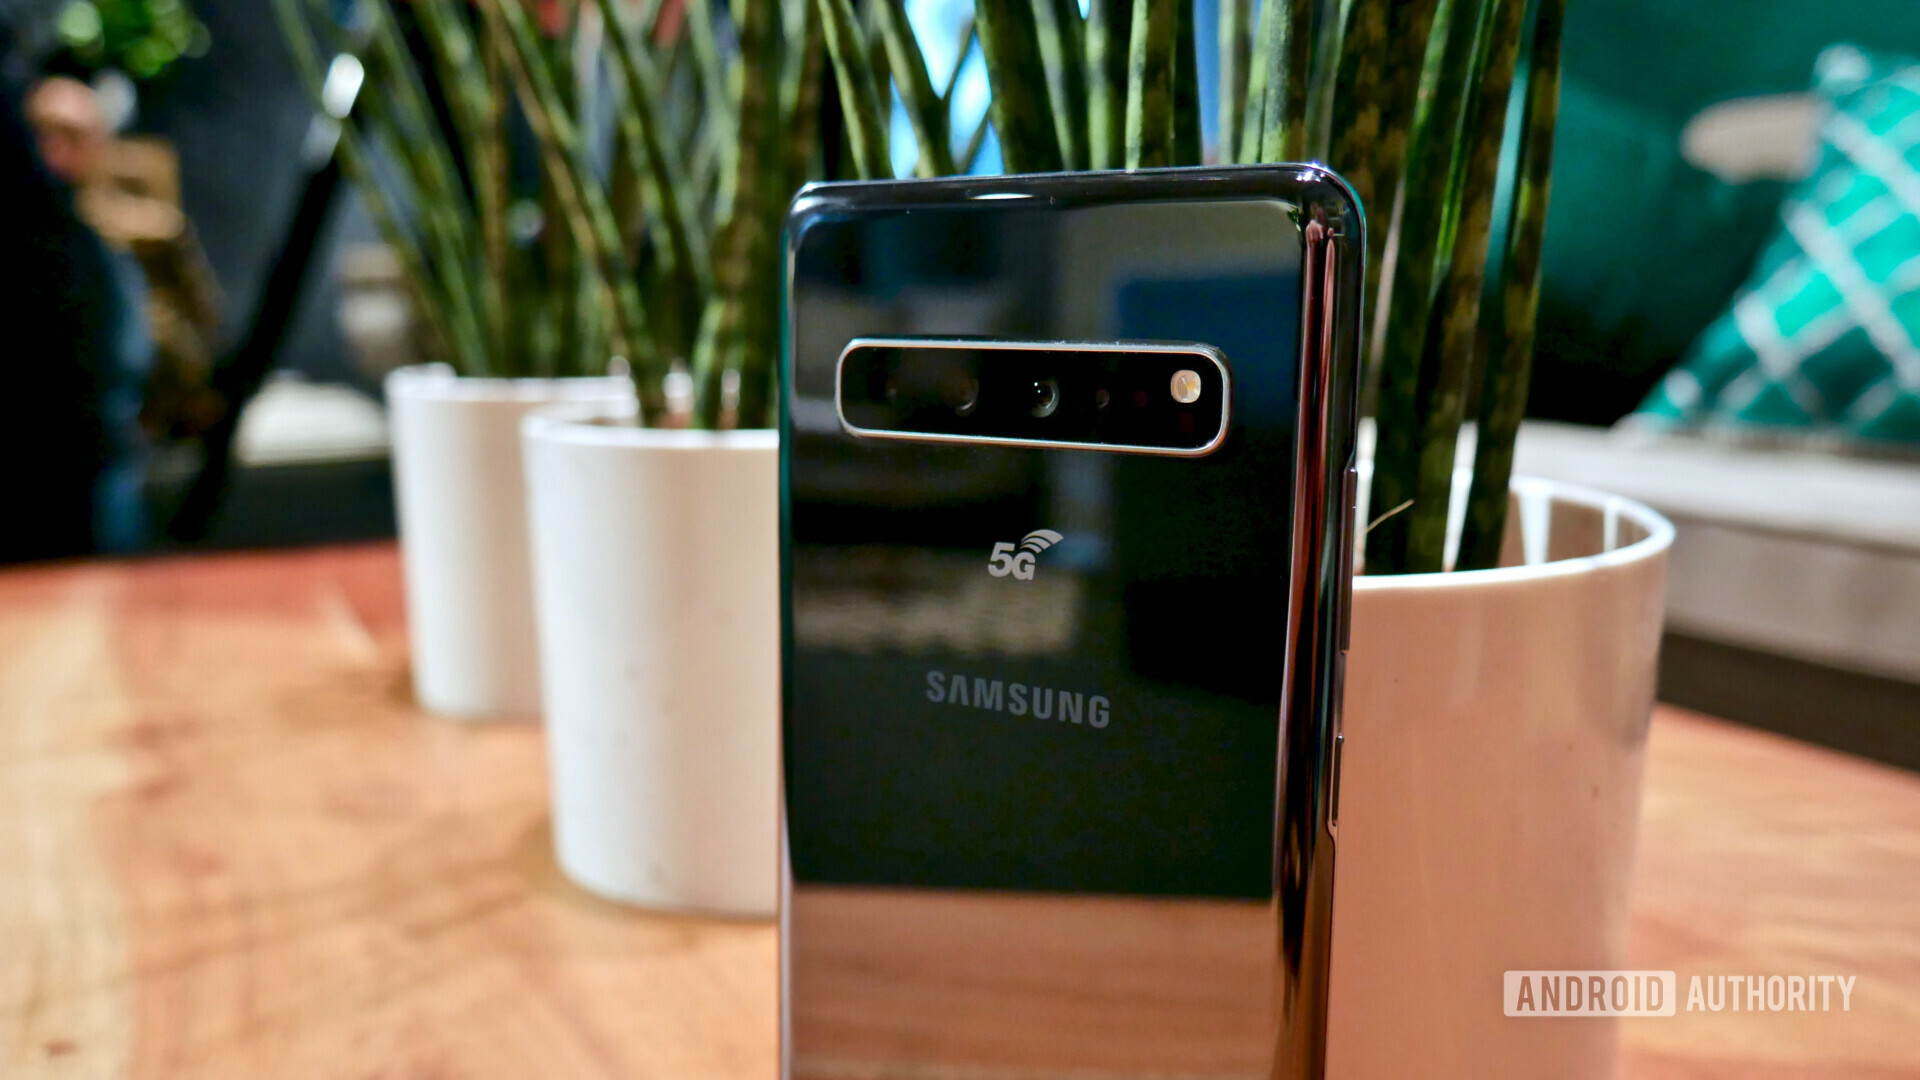 Samsung Galaxy S10 5G: Much more than just 5G